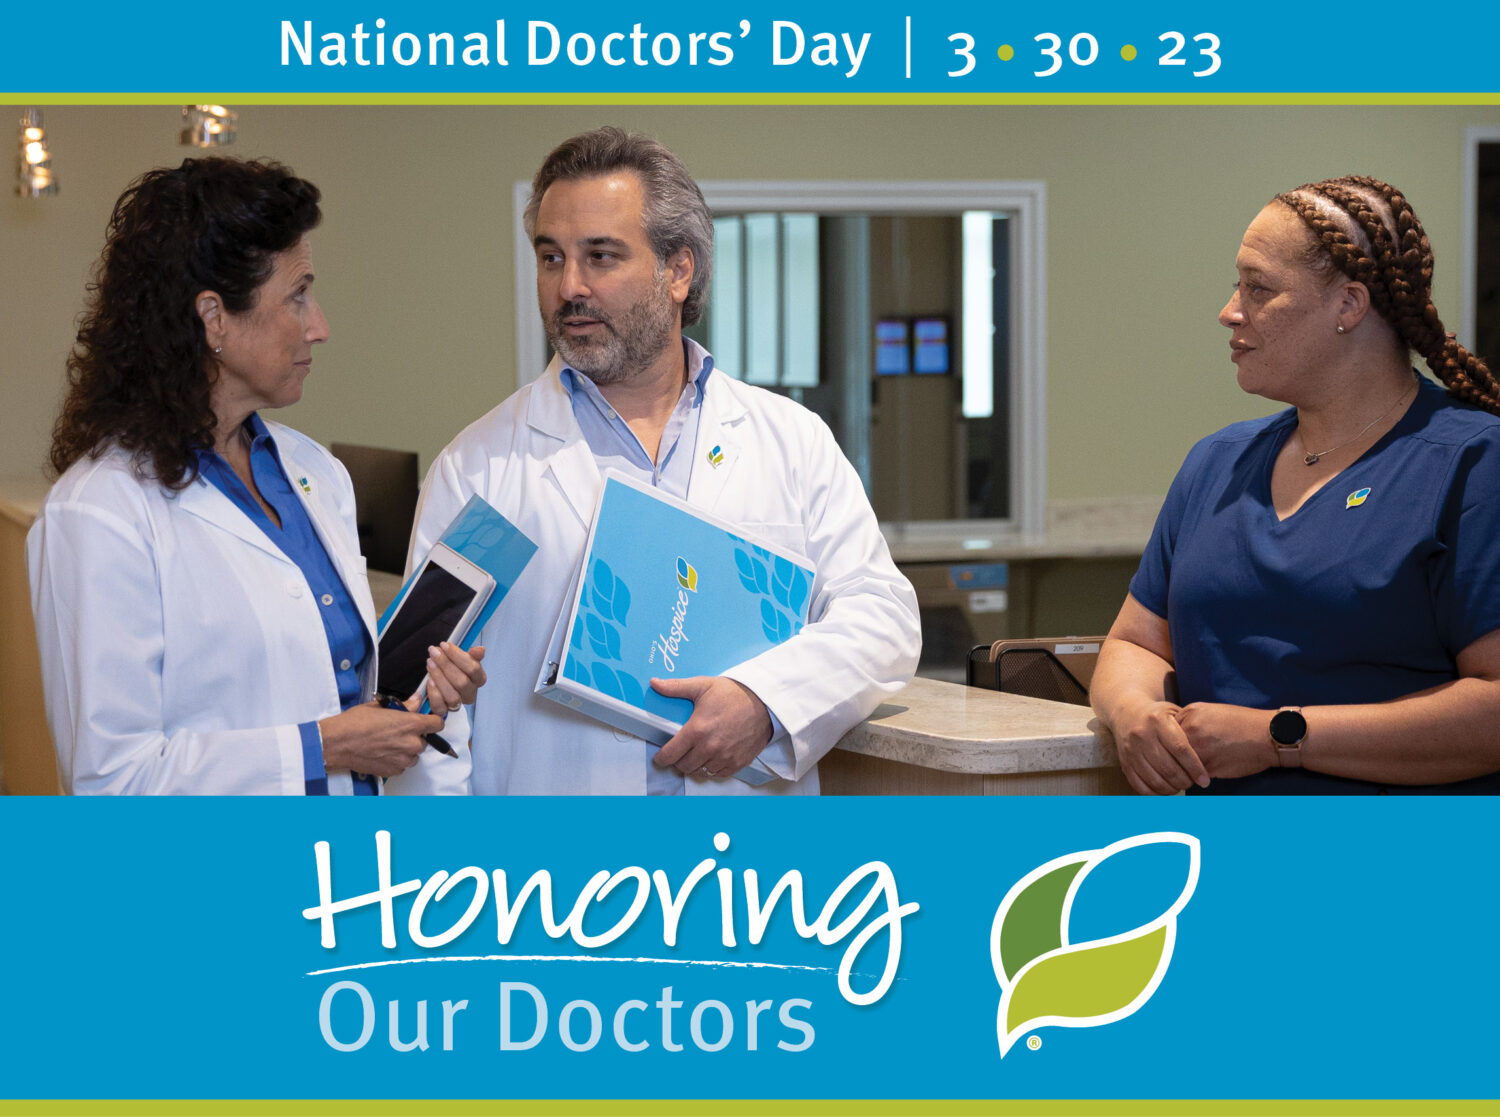 Honoring Our Doctors. National Doctors' Day. 03/30/23. Ohio's Hospice